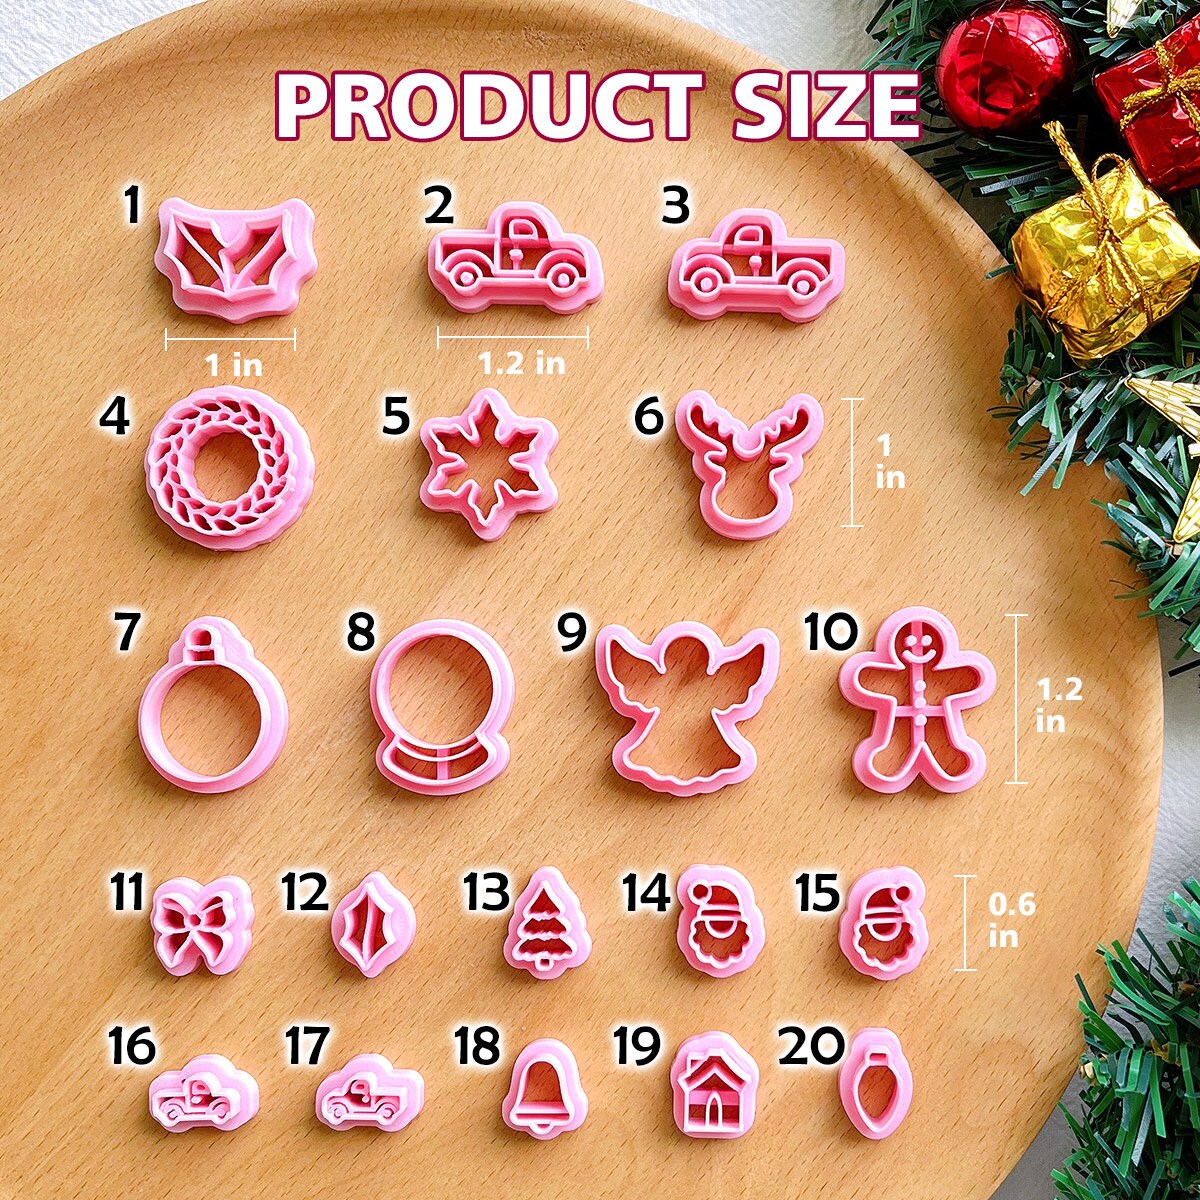 KEOKER Christmas Polymer Clay Cutters (10 Shapes)